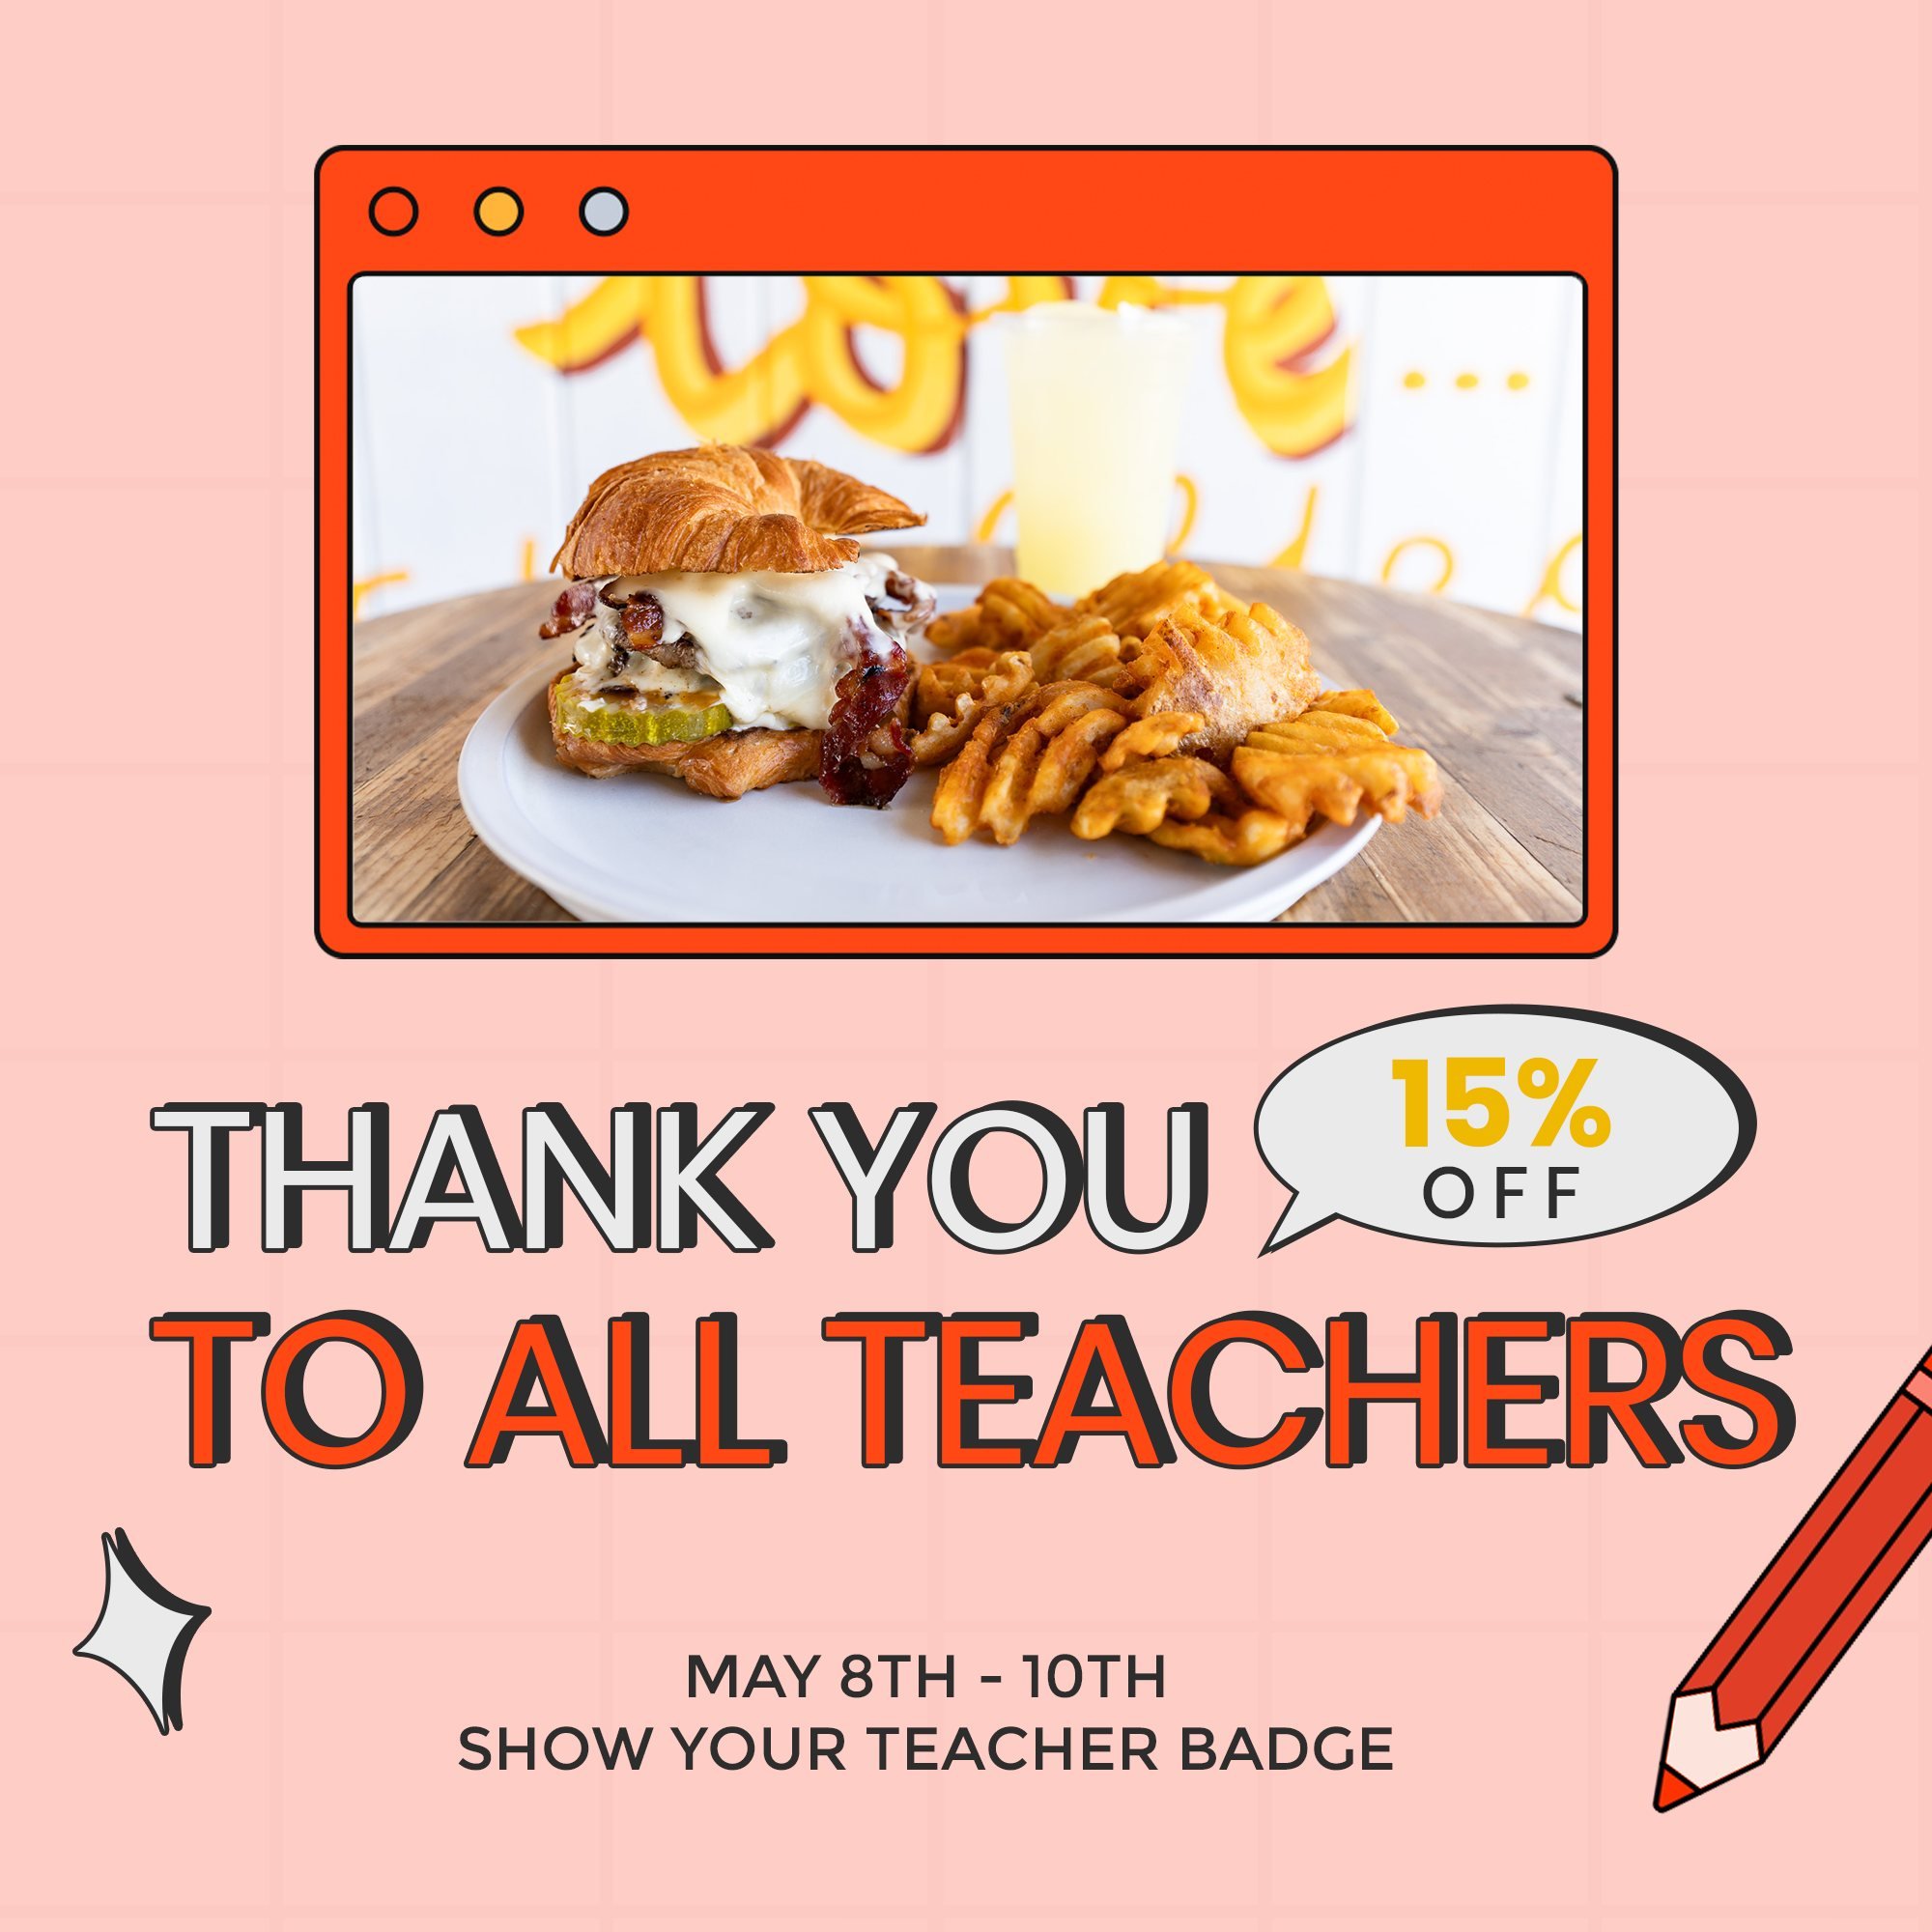 TEACHERS we are offering 15% off your order this week 5/8-5/10 when you show your badge as we share our appreciation for all you do!
Share this with your favorite teacher!!

#waffeestation #visitjoco